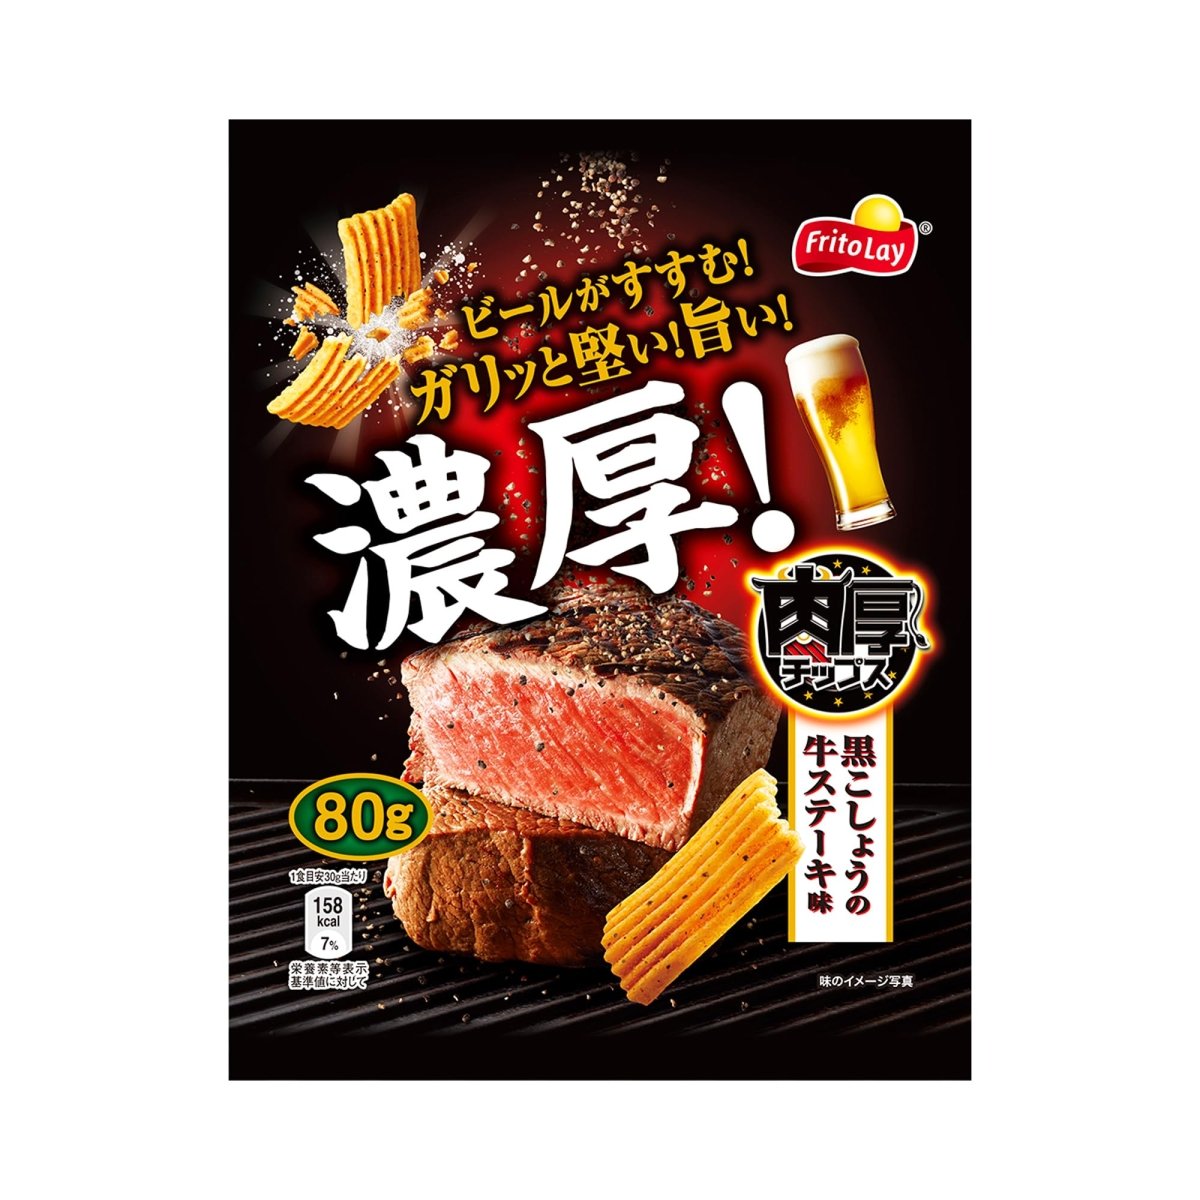 Frito Lay's Black Pepper Steak Flavour Crisps (Japan) 80g - Candy Mail UK